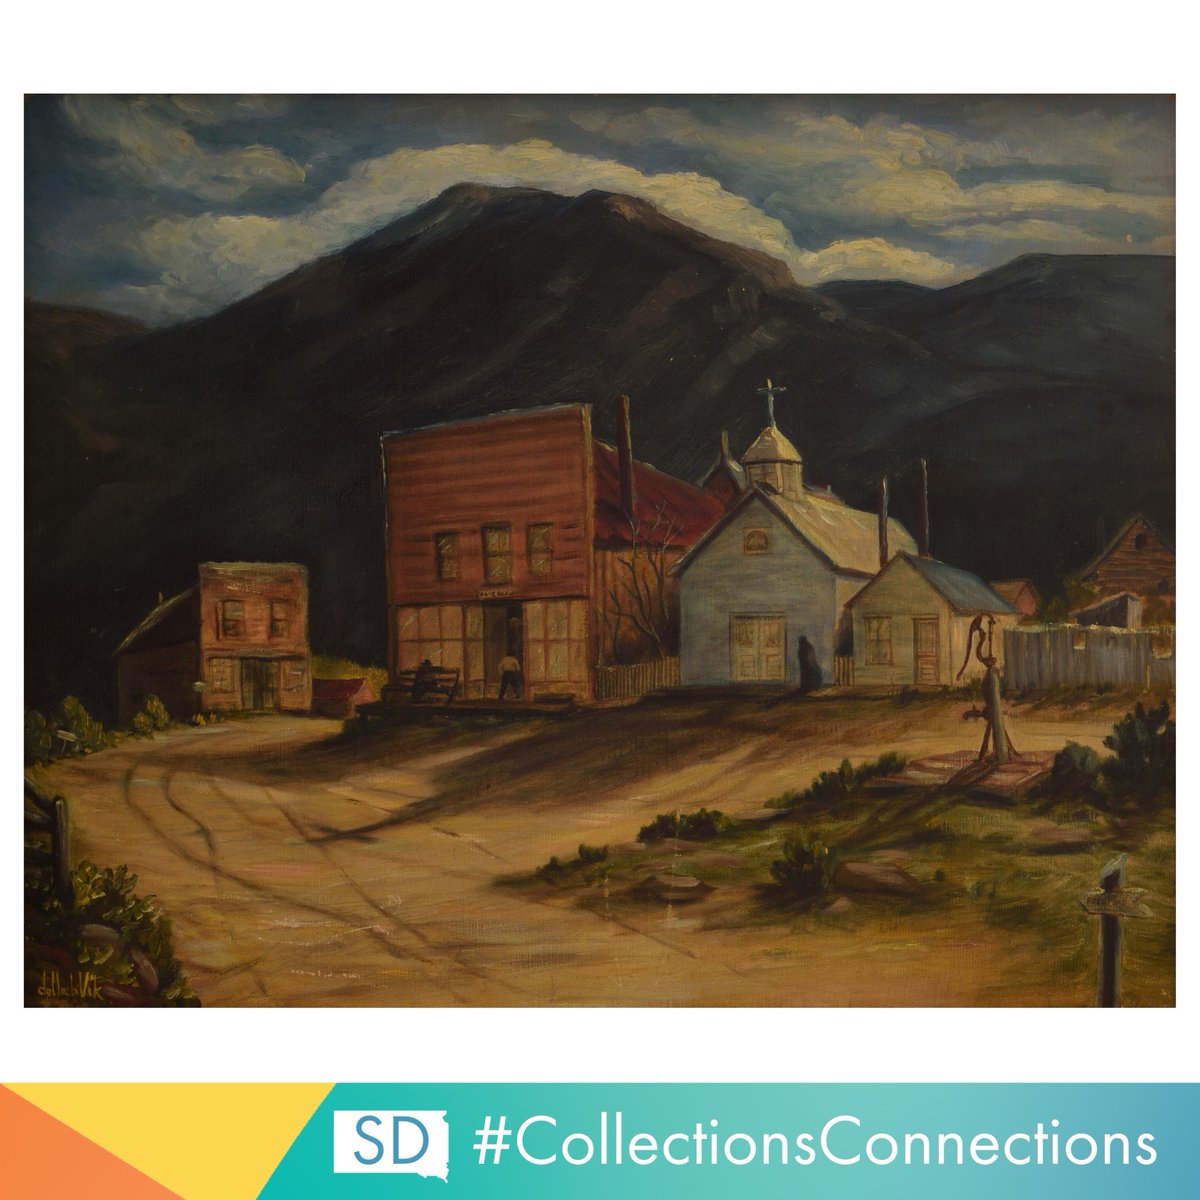 Della Blanche Vik was born in River Sioux IA in 1889, moved to Whitewood SD in 1908. She and her husband created a photography studio where they specialized in portraits and Black Hills landscapes. 
#CollectionsConnections #stateofcreate